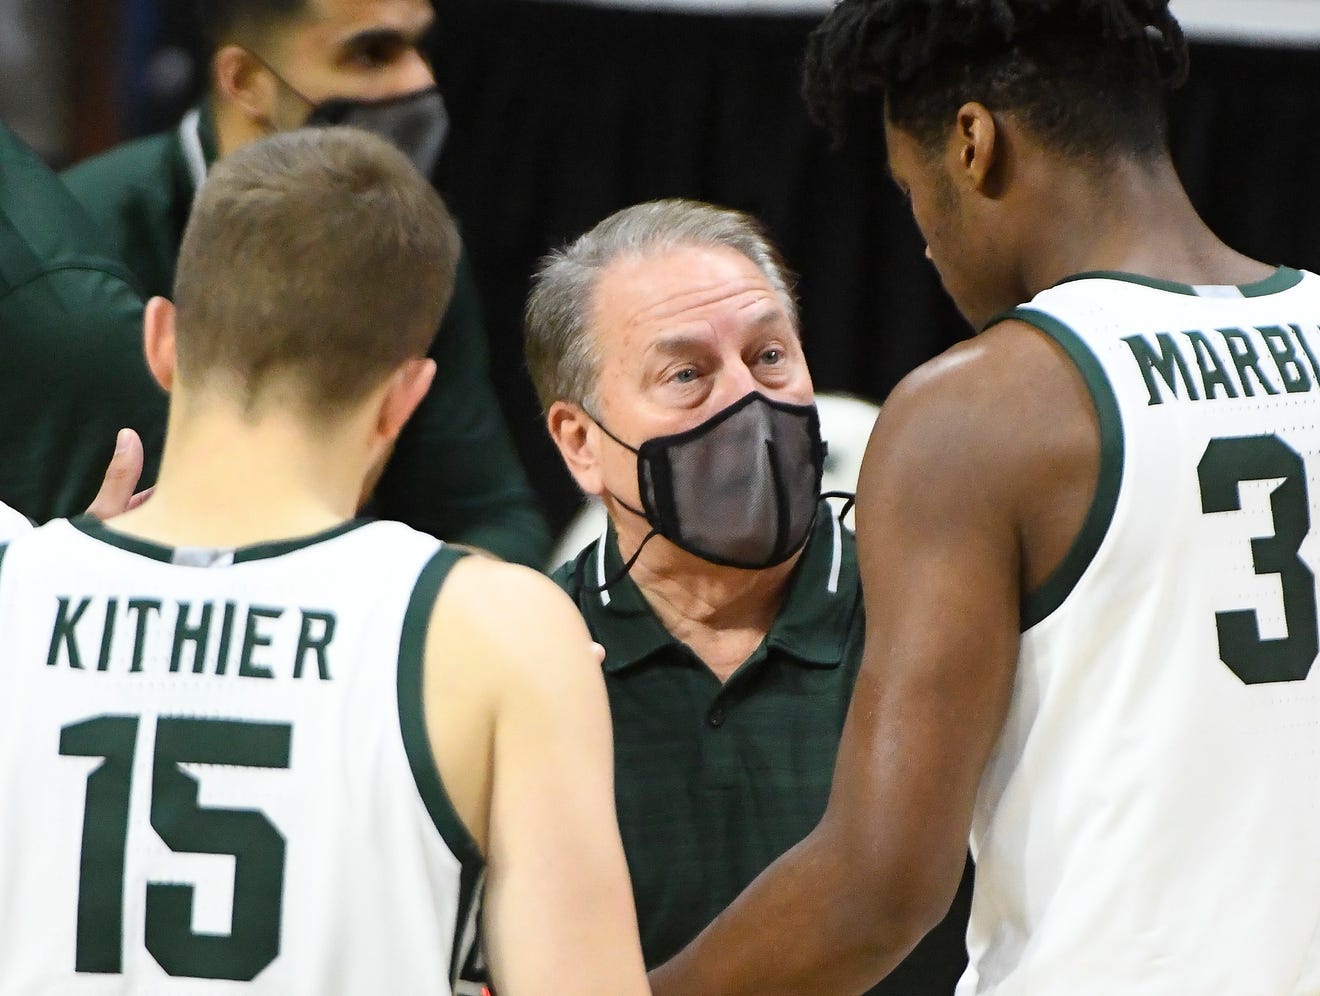 Tom Izzo tested positive for COVID-19 earlier this year.